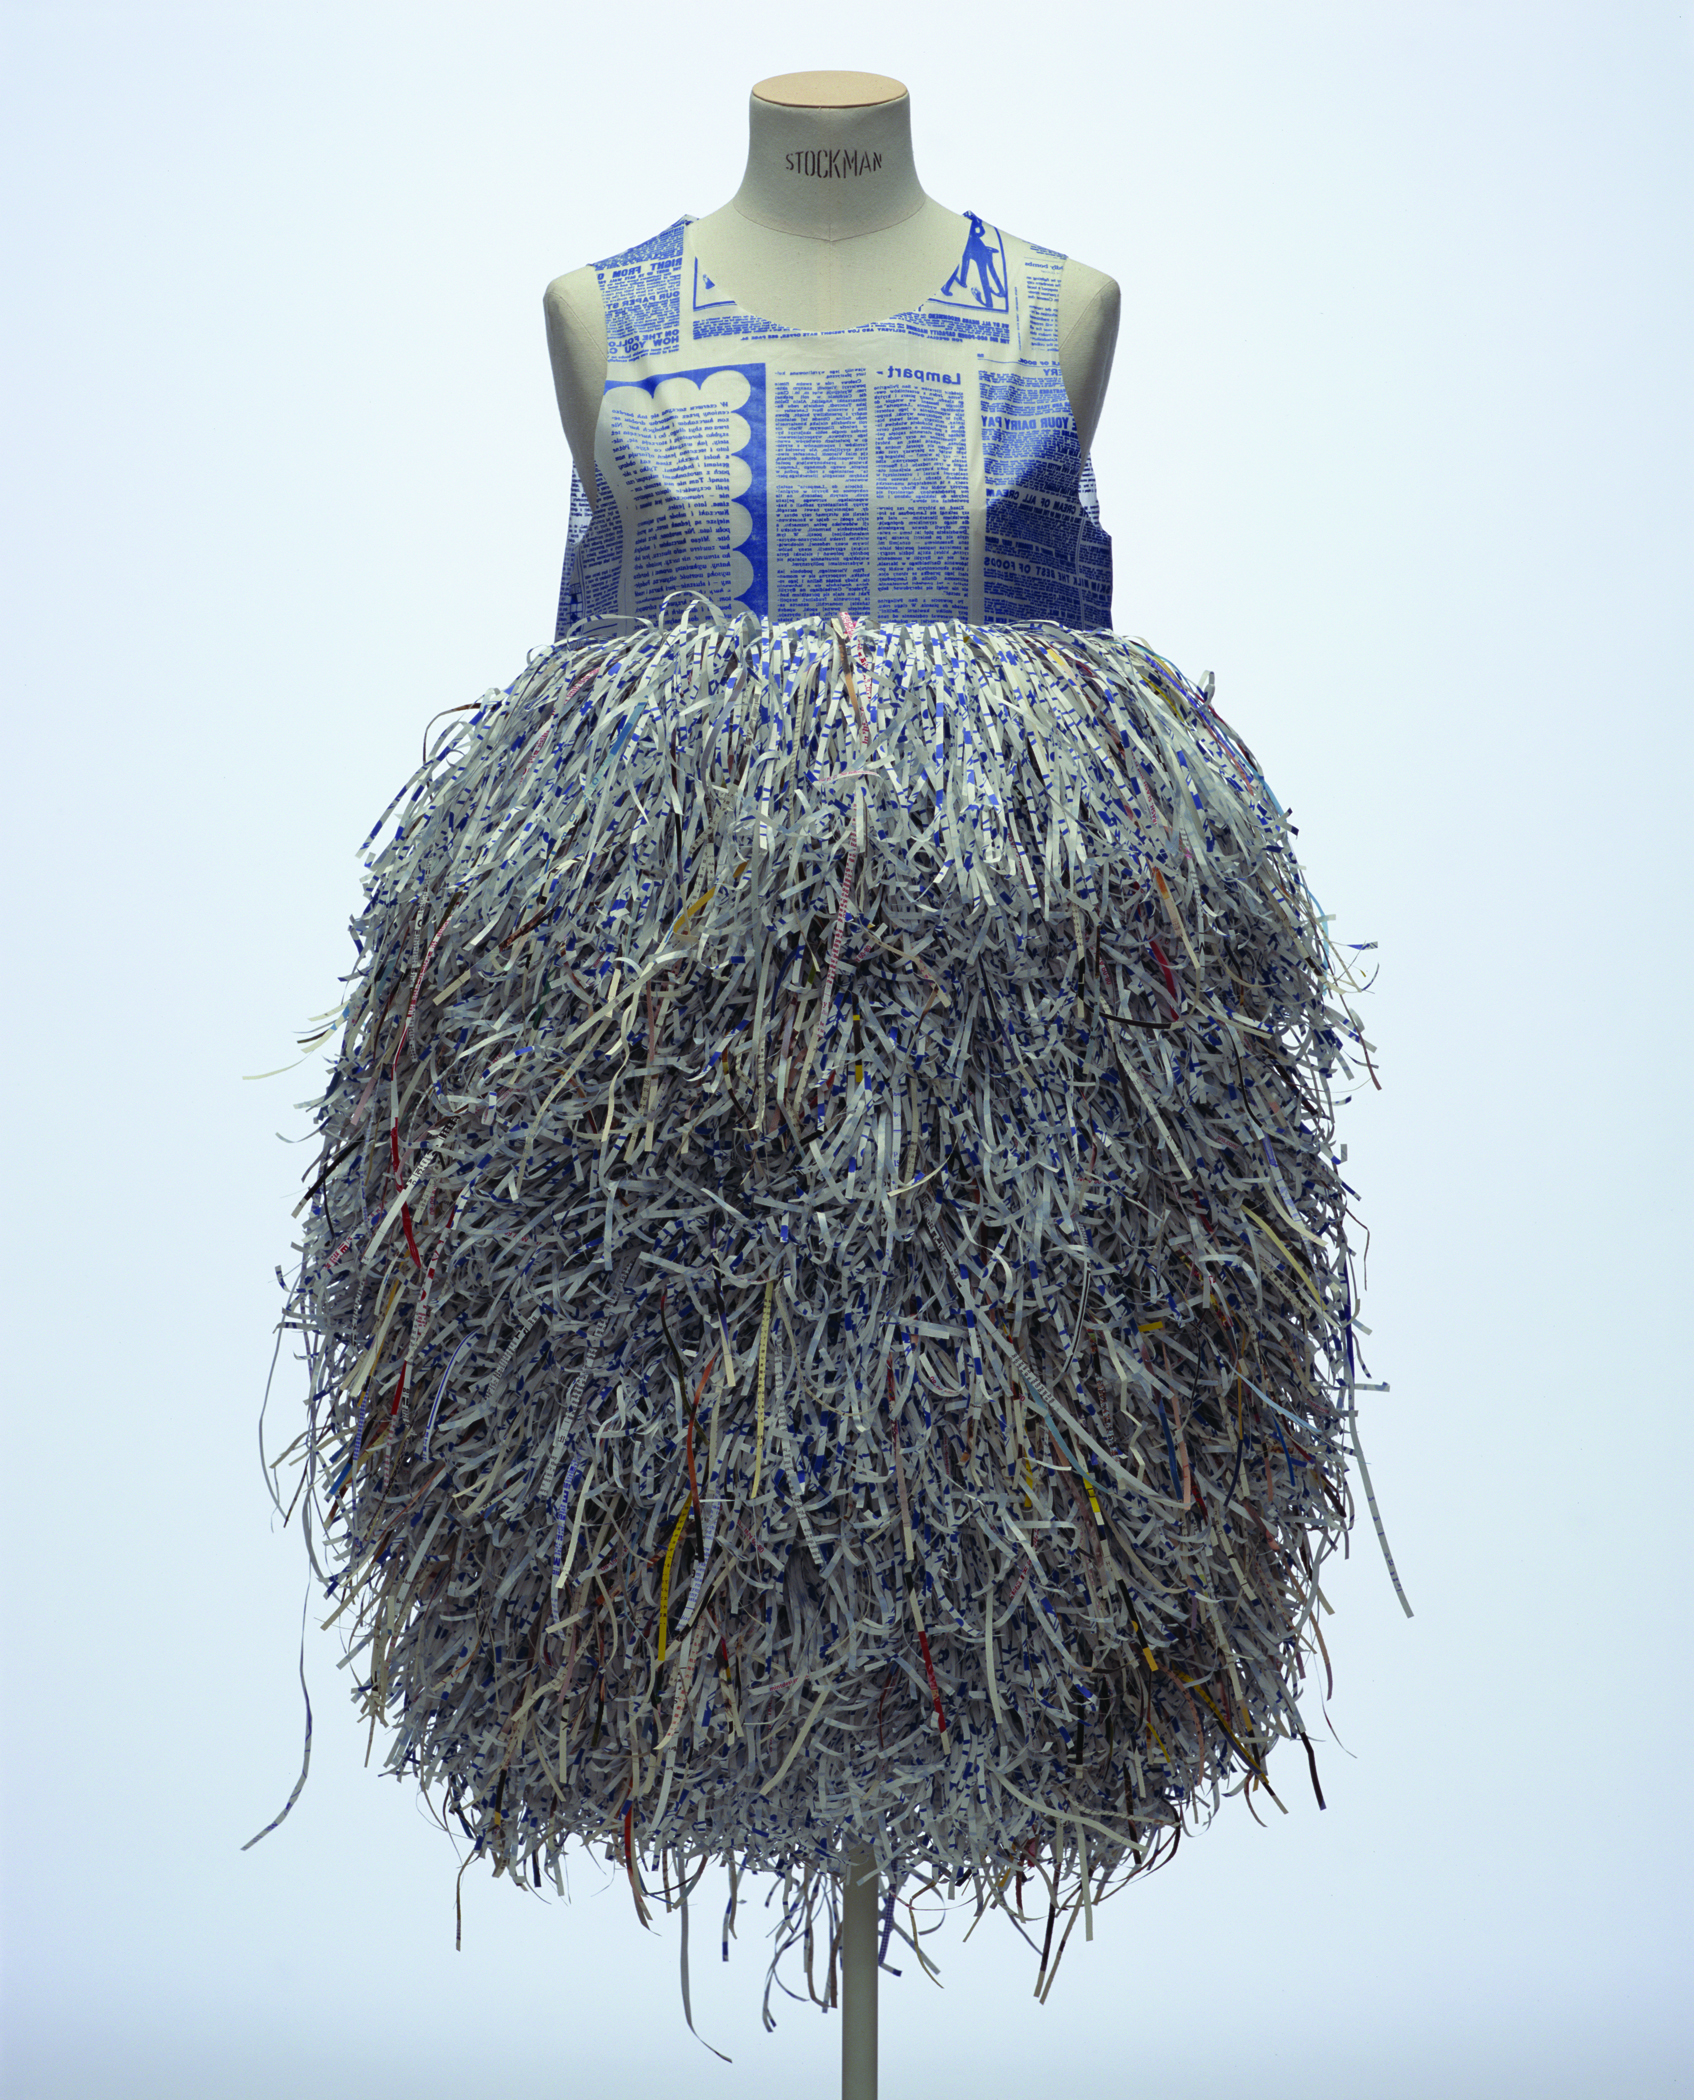 A 2008 dress inspired by shredded newspaper (actually made of polyester), by Mintdesigns.